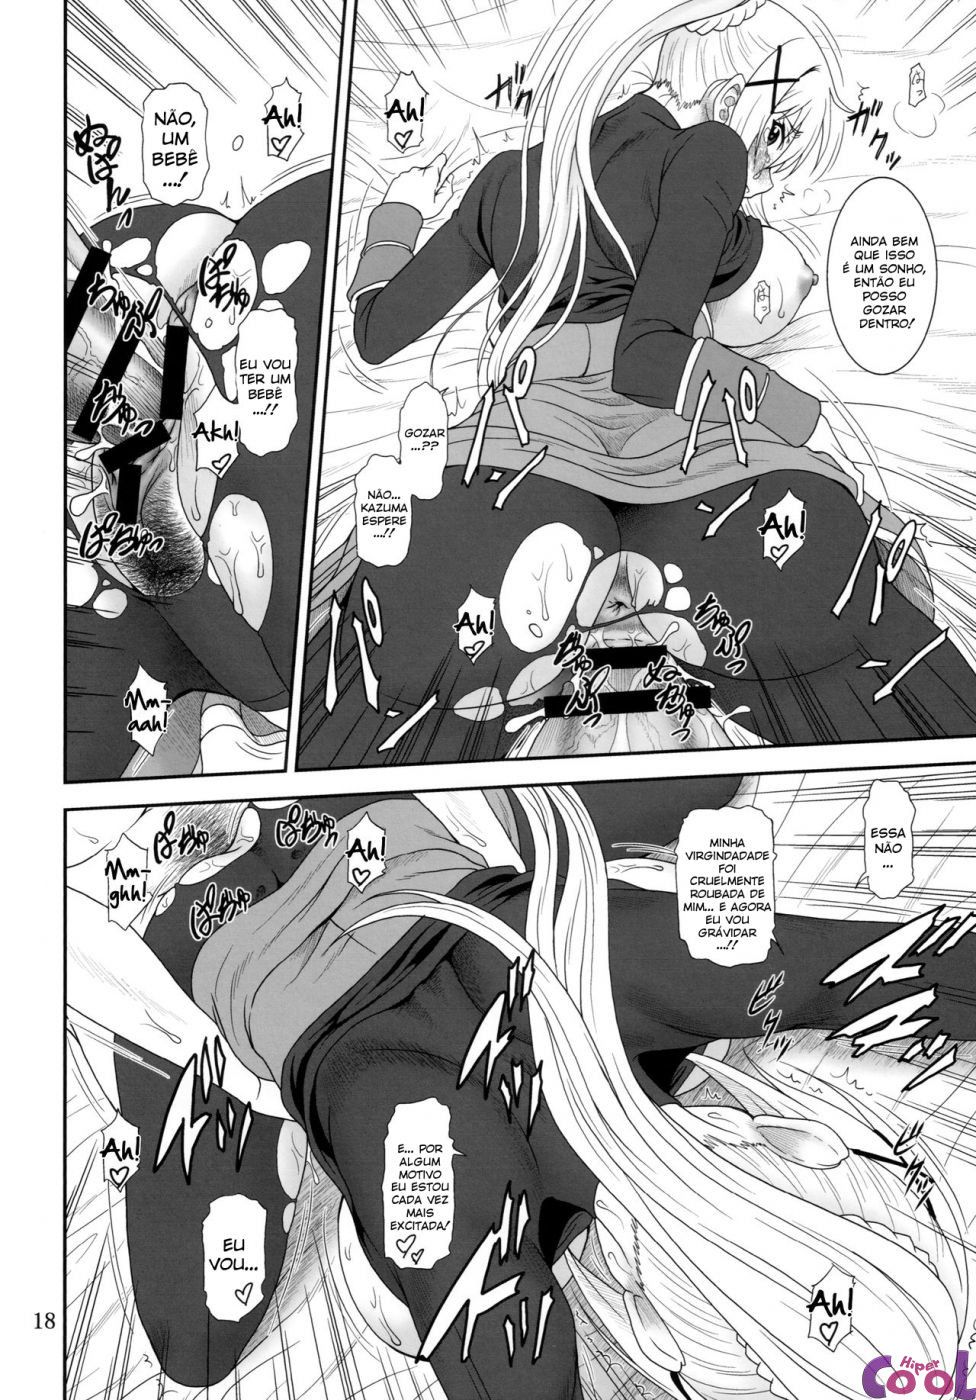 trouble-darkness-chapter-01-page-17.jpg